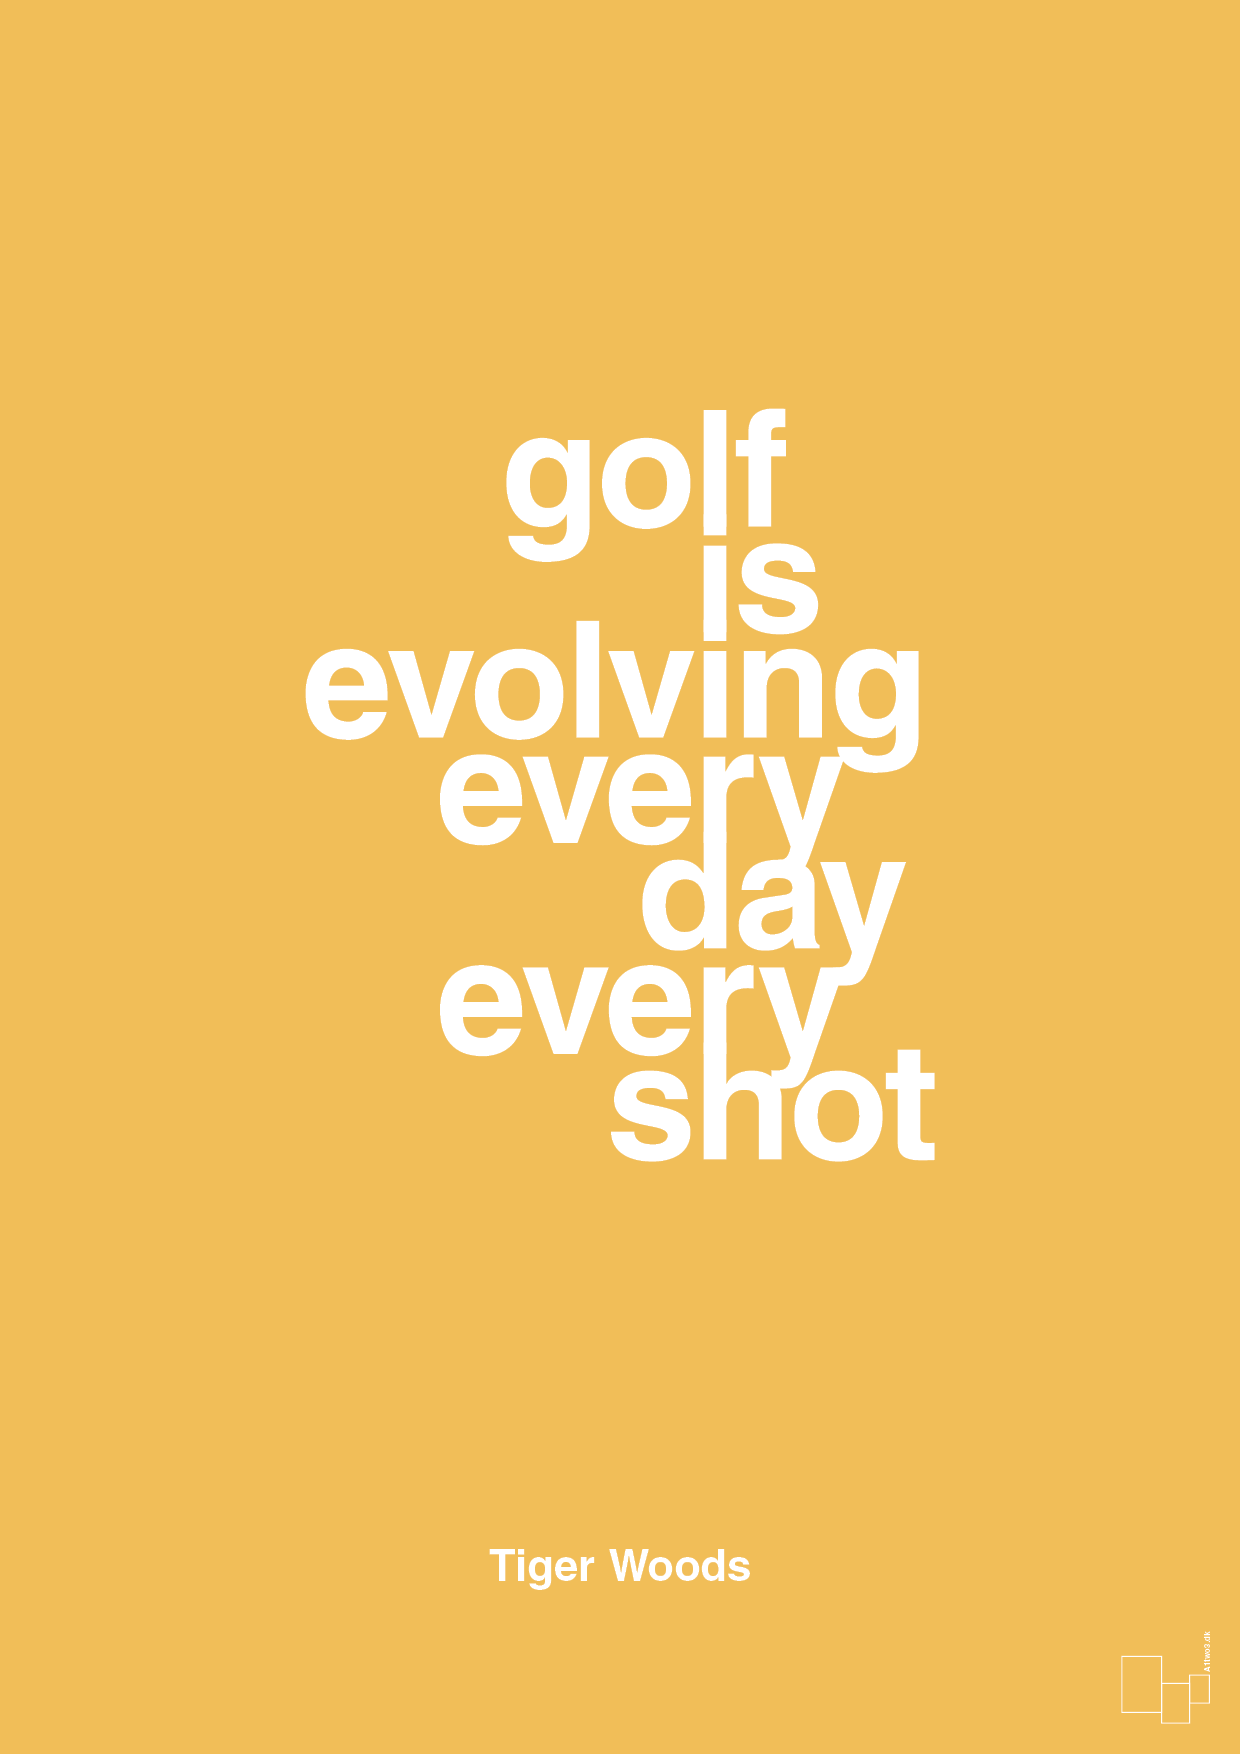 golf is evolving every day every shot - Plakat med Citater i Honeycomb